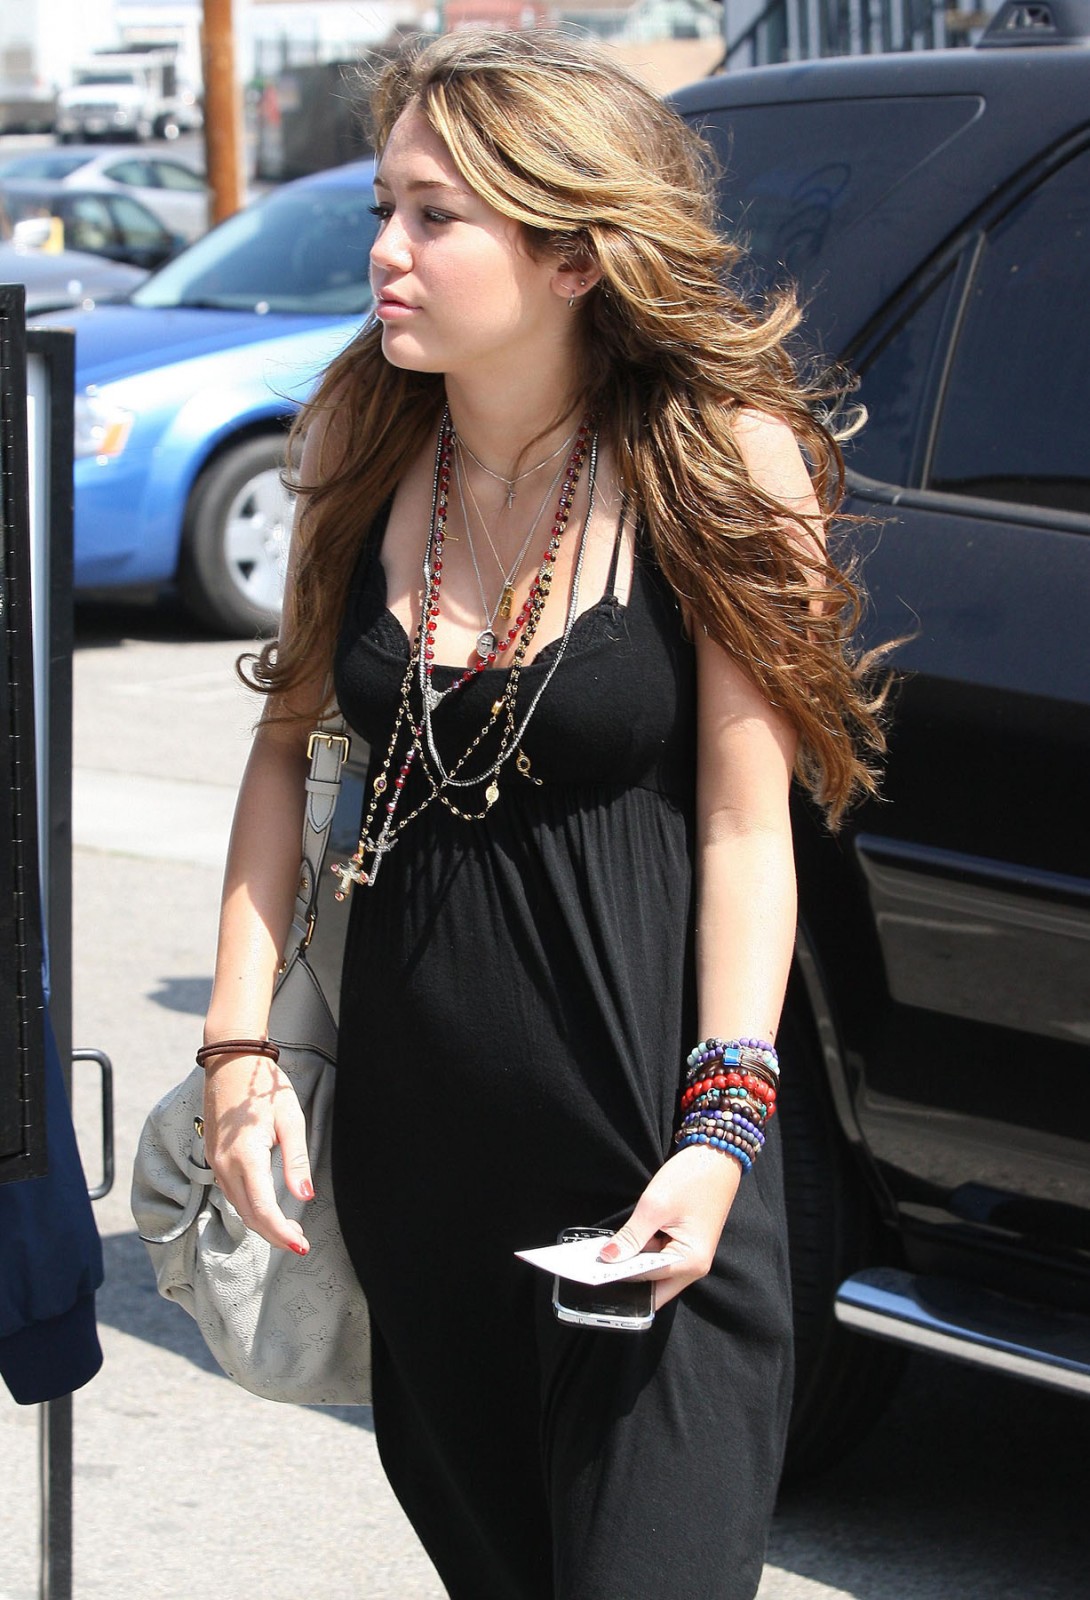 Miley-Cyrus-20090831_Out-n-About-Studio-City_May09_15135-1090x1600.jpg